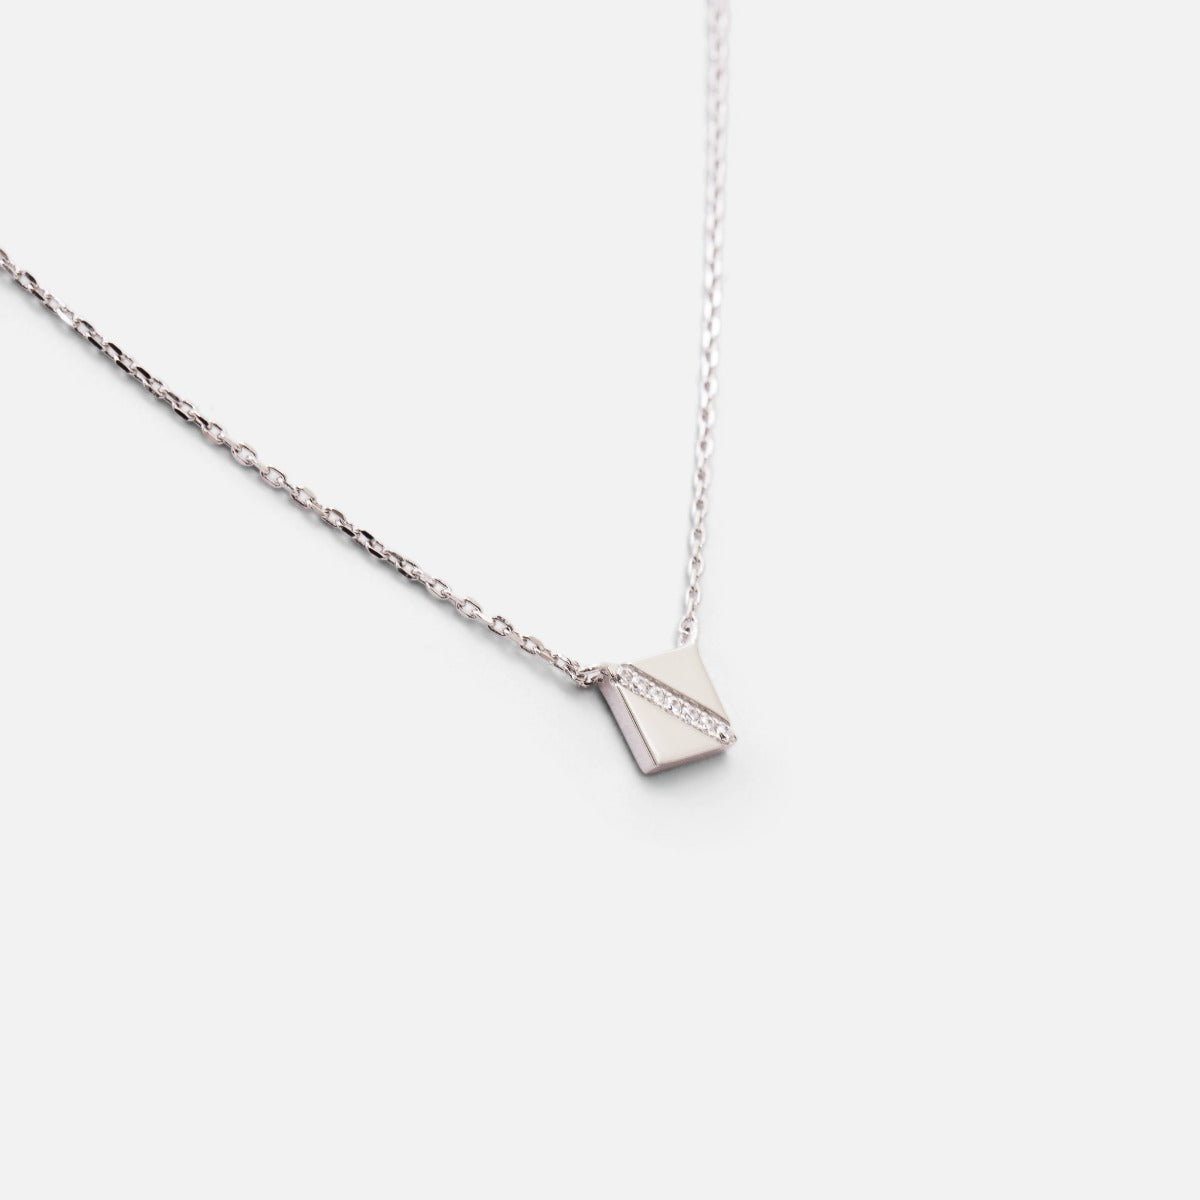 Sterling silver necklace and square pendent